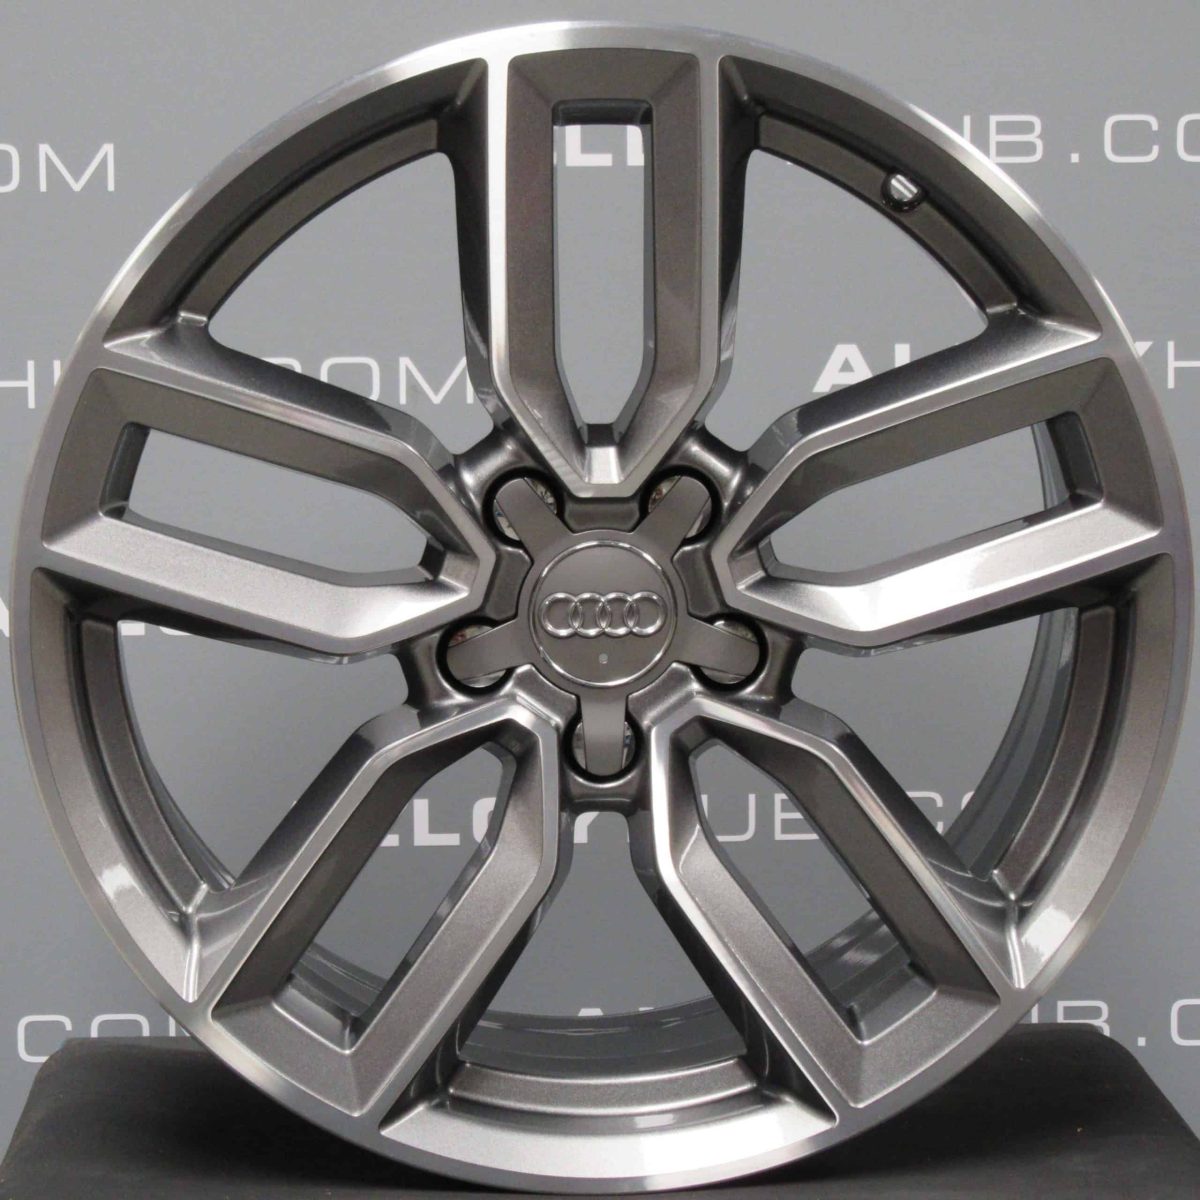 Genuine Audi S3 RS3 A3 8V 5 Twin Spoke 18" Inch Alloy Wheels with Grey & Diamond Turned Finish 8V0 601 025 M